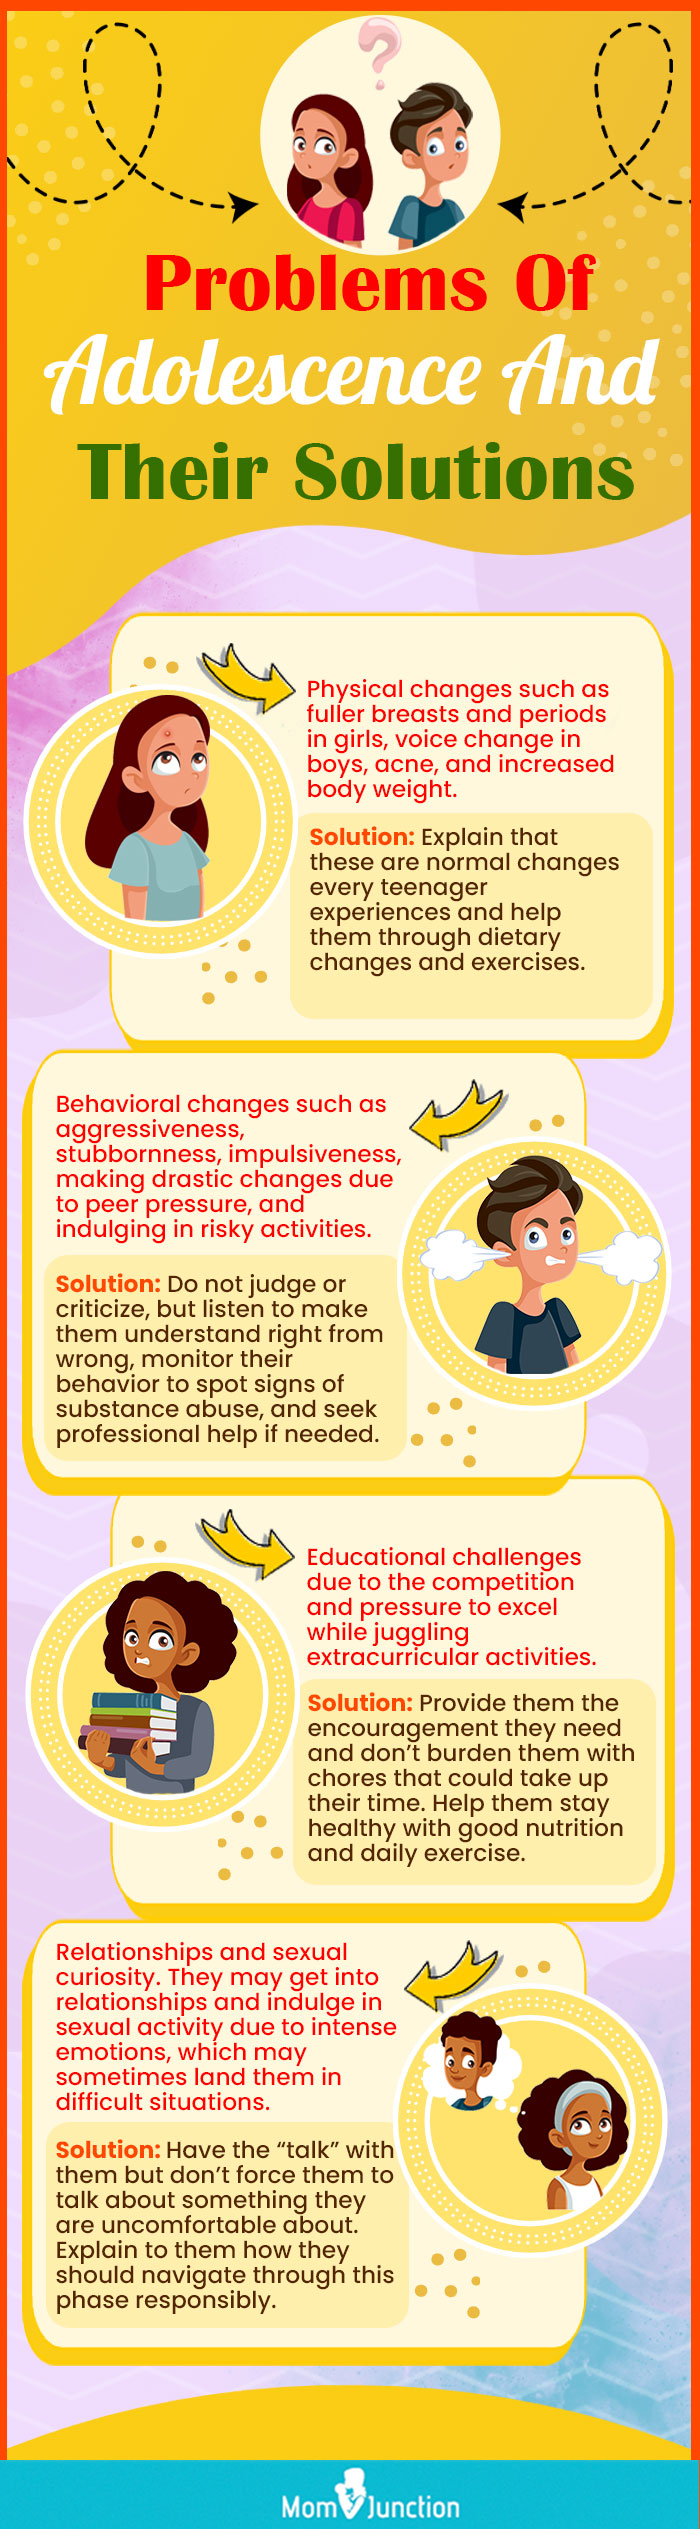 problems of adolescence and their solutions (infographic)